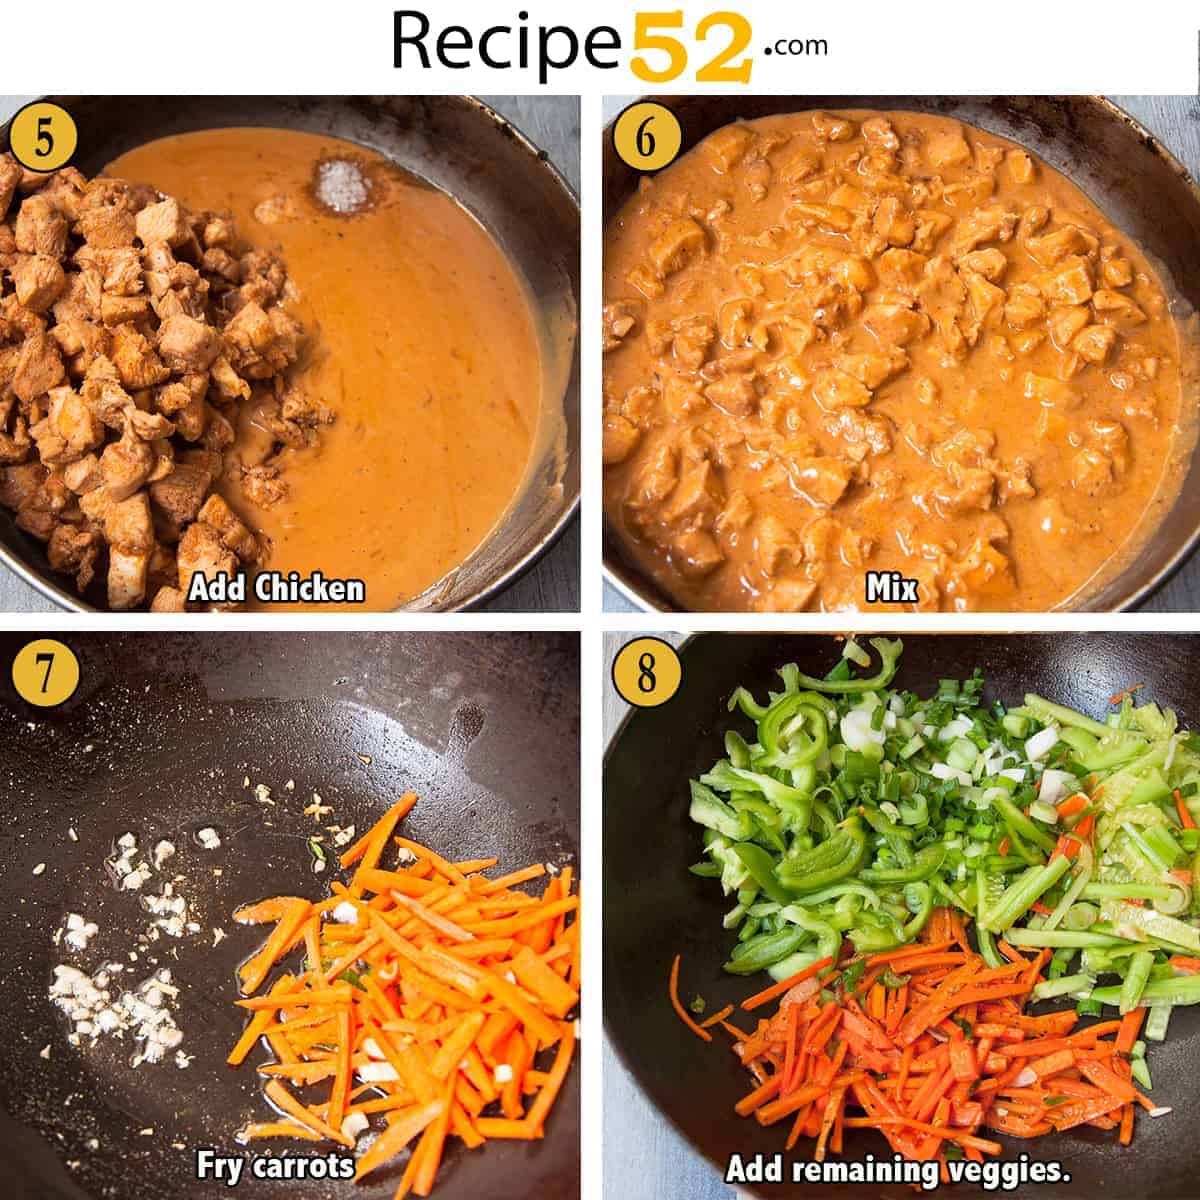 Steps to add cooked chicken to the sauce and stir fry vegetables.